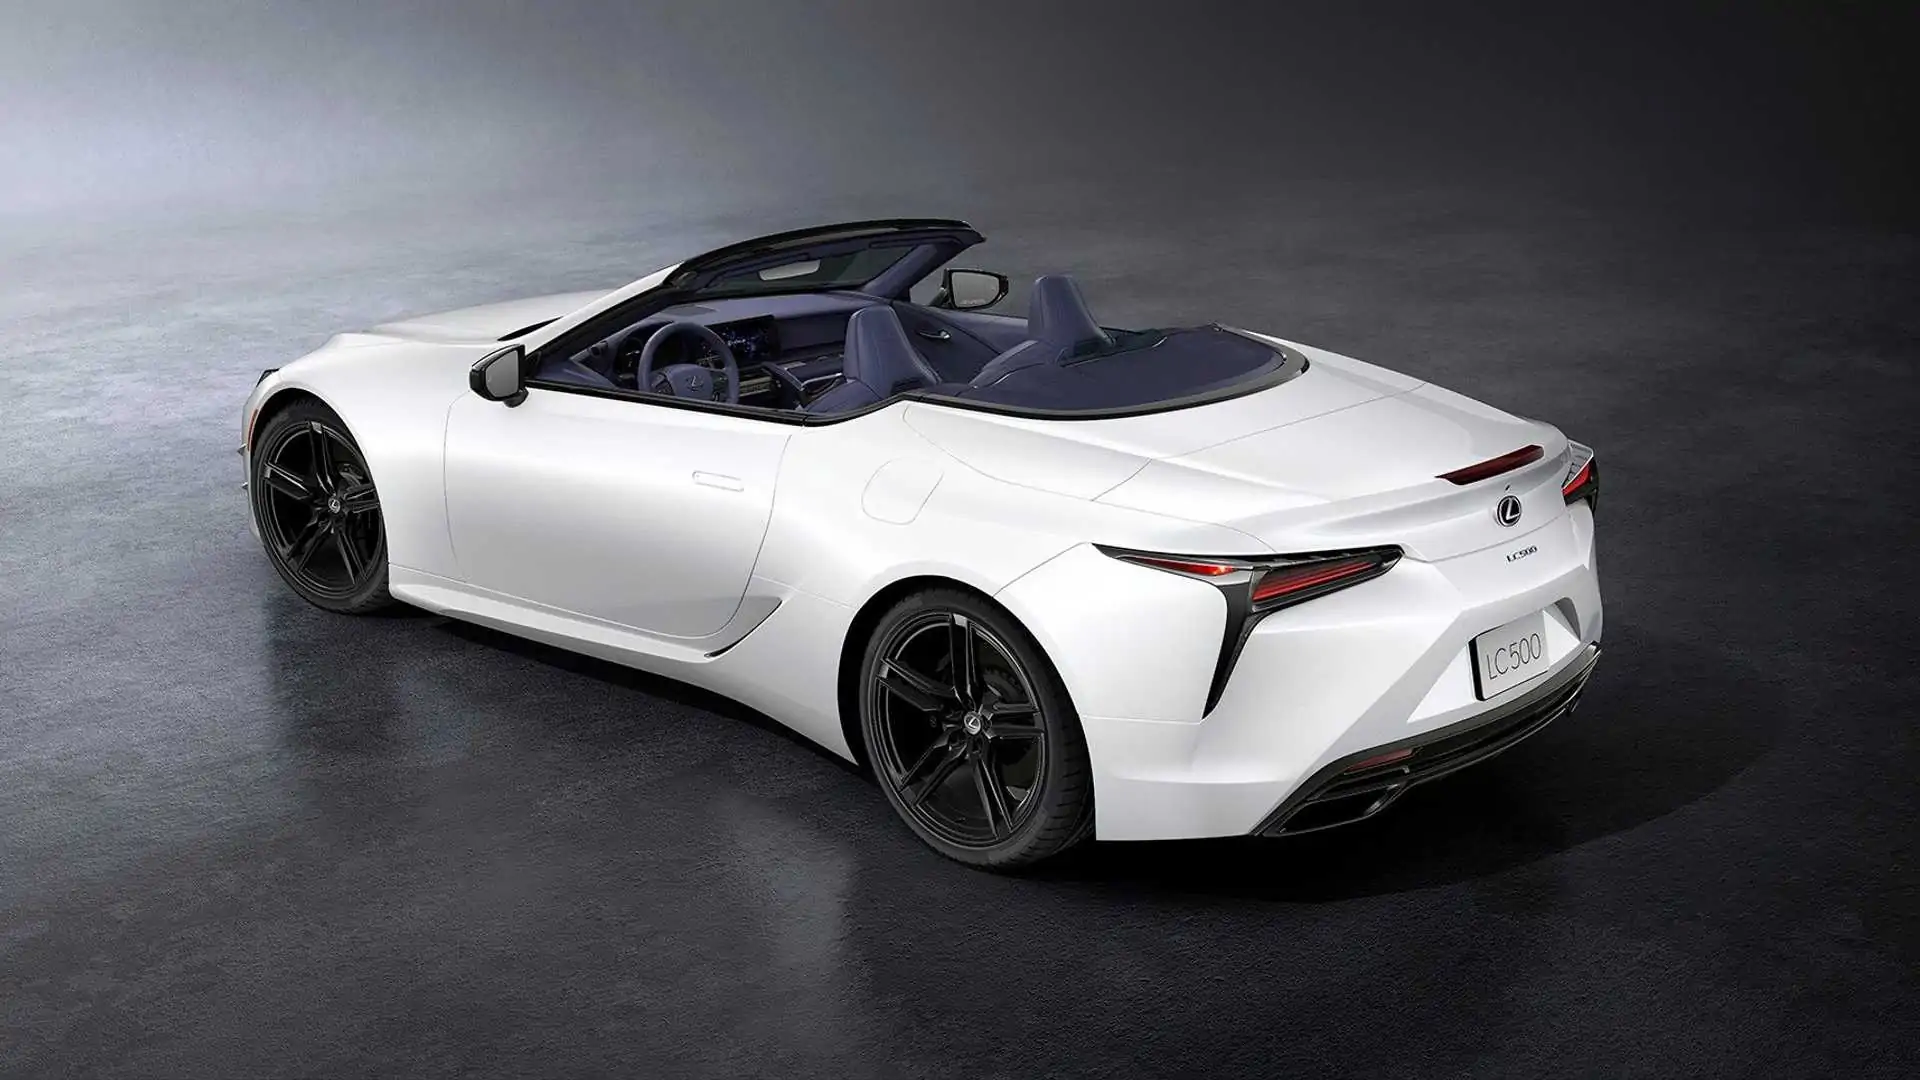  Lexus LC Launched In Europe With Ultimate Edition Featuring